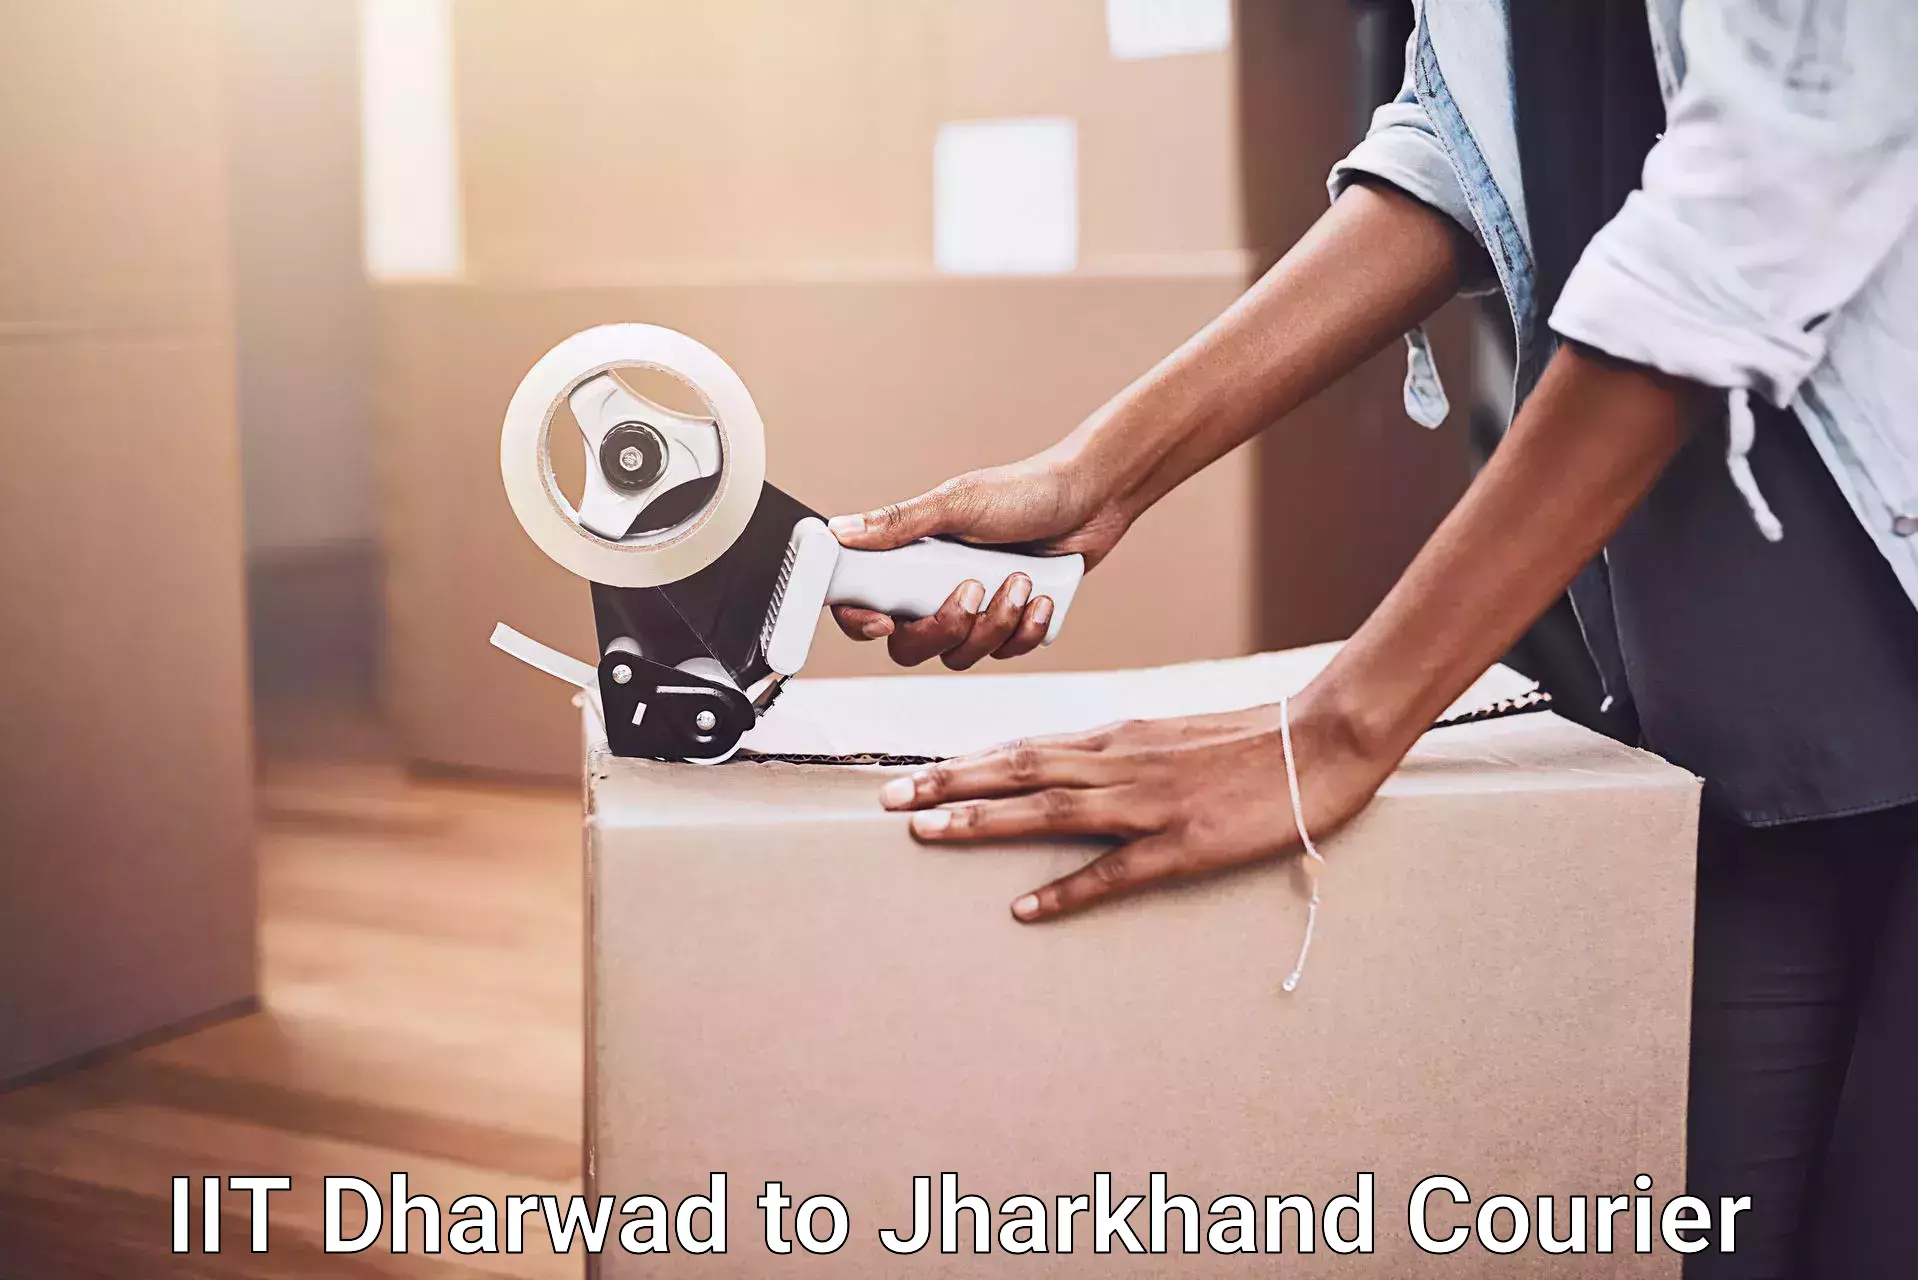 Furniture moving assistance IIT Dharwad to Dhanbad